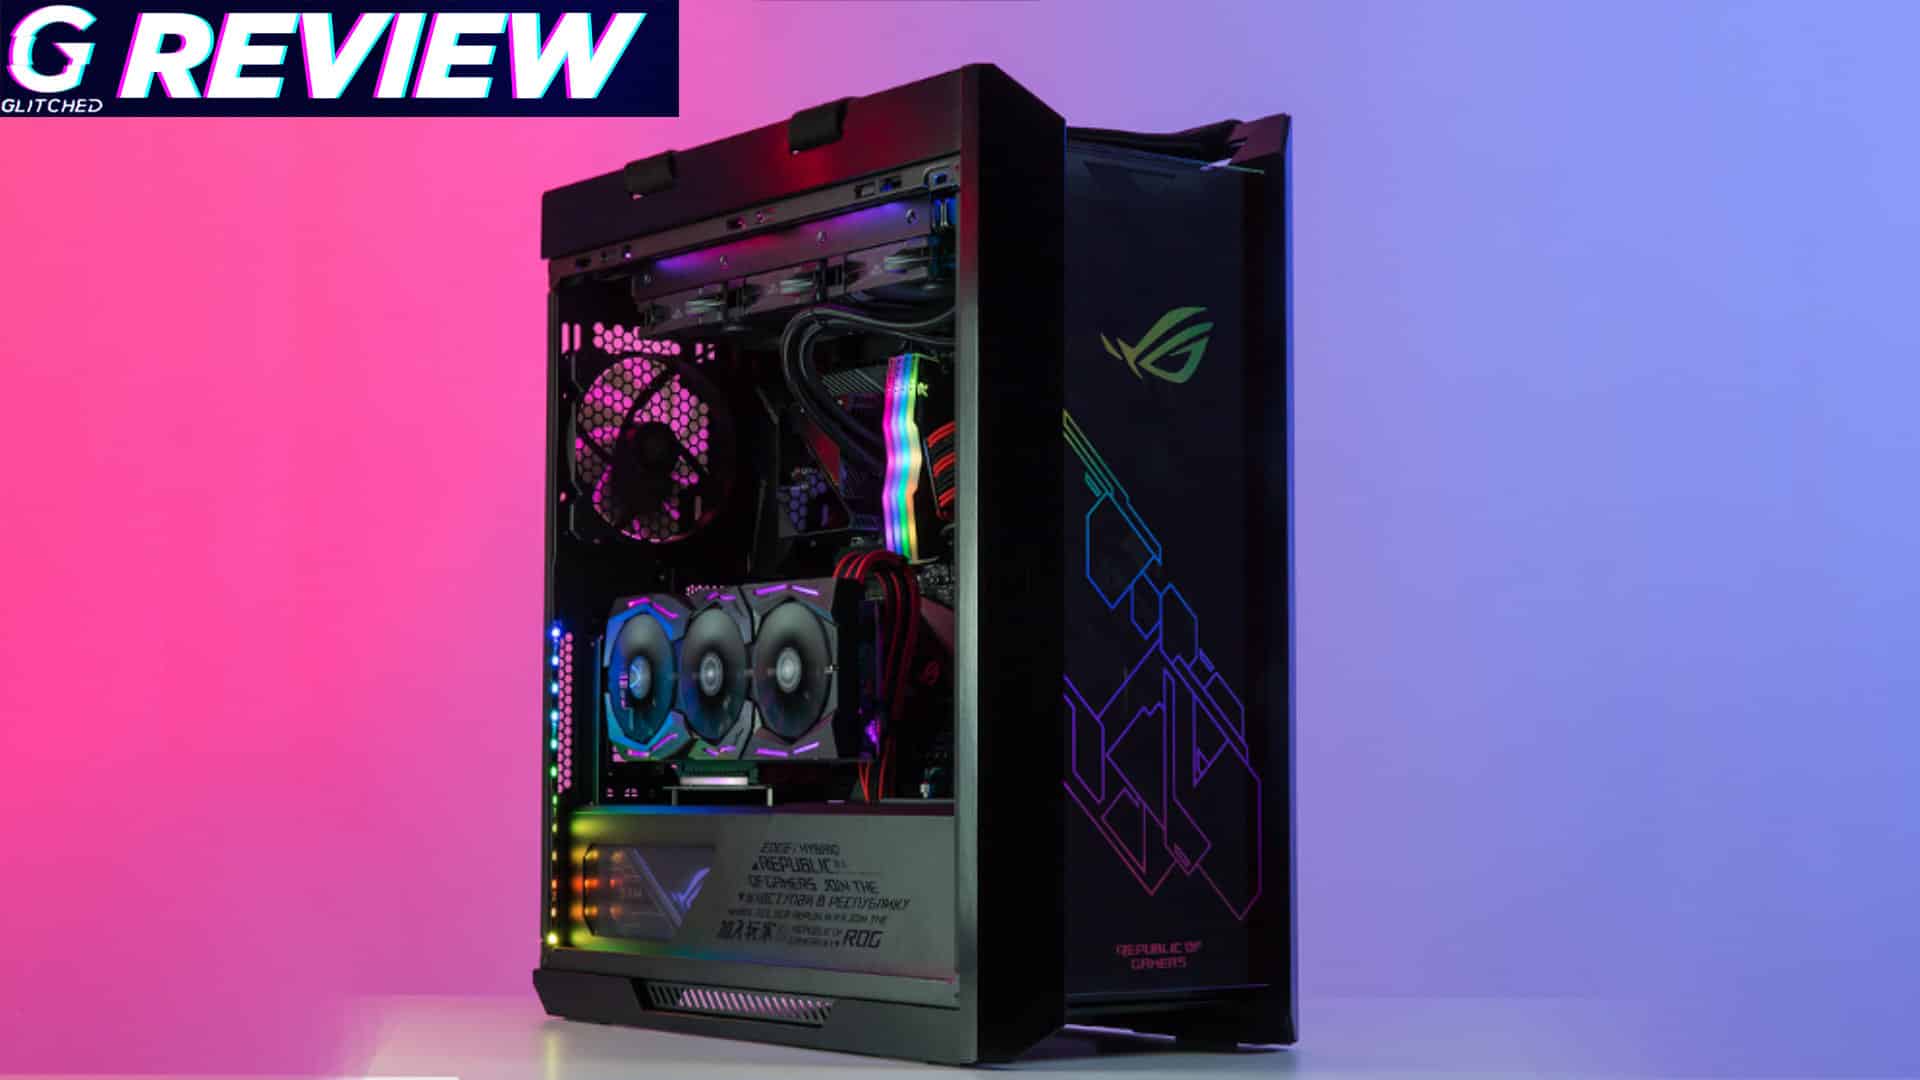 We Review The ‘Aston Martin’ of ASUS Gaming PCs